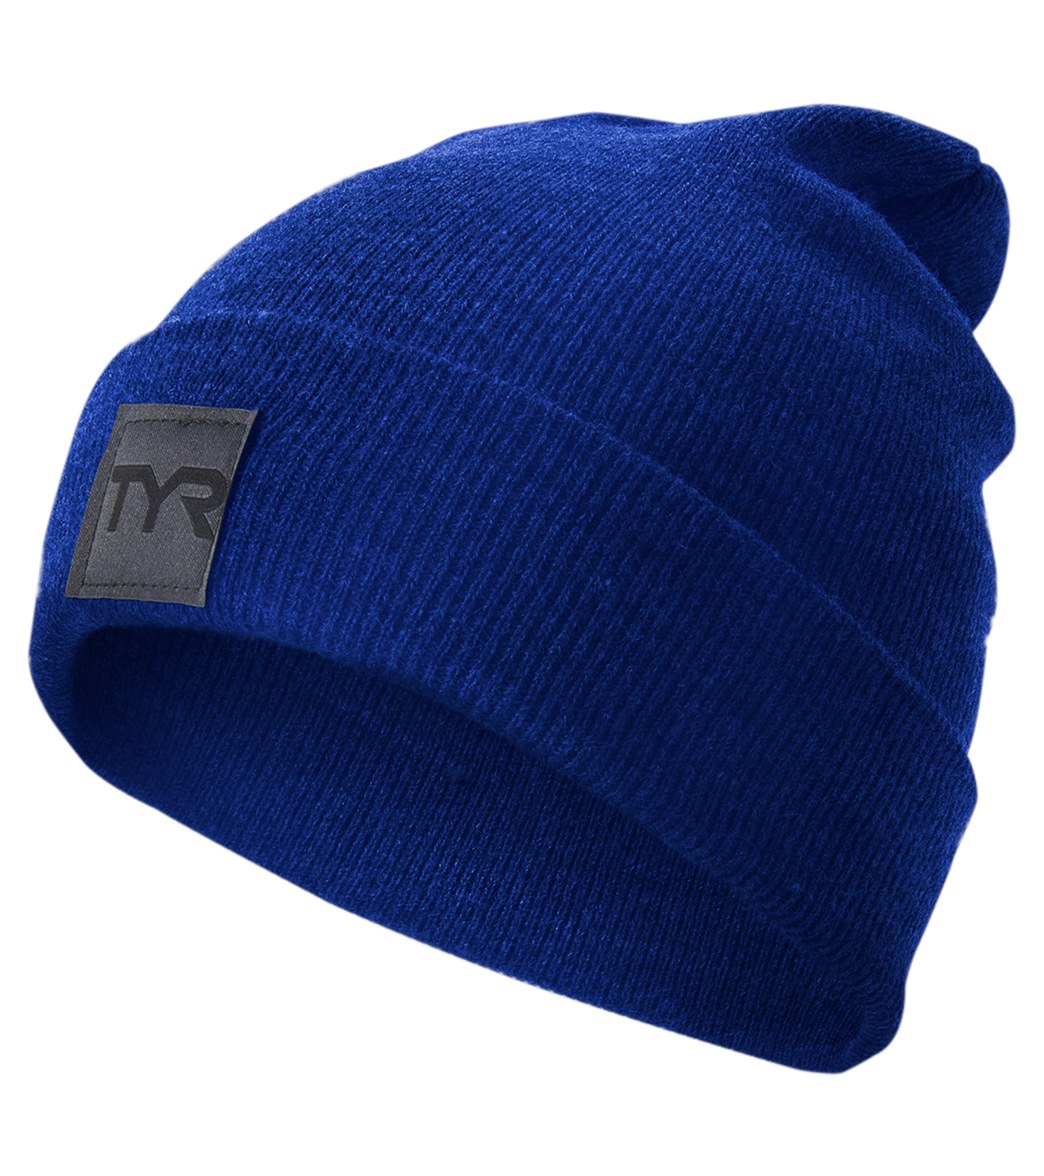 TYR Cuffed Knit Beanie - Royal One Size - Swimoutlet.com